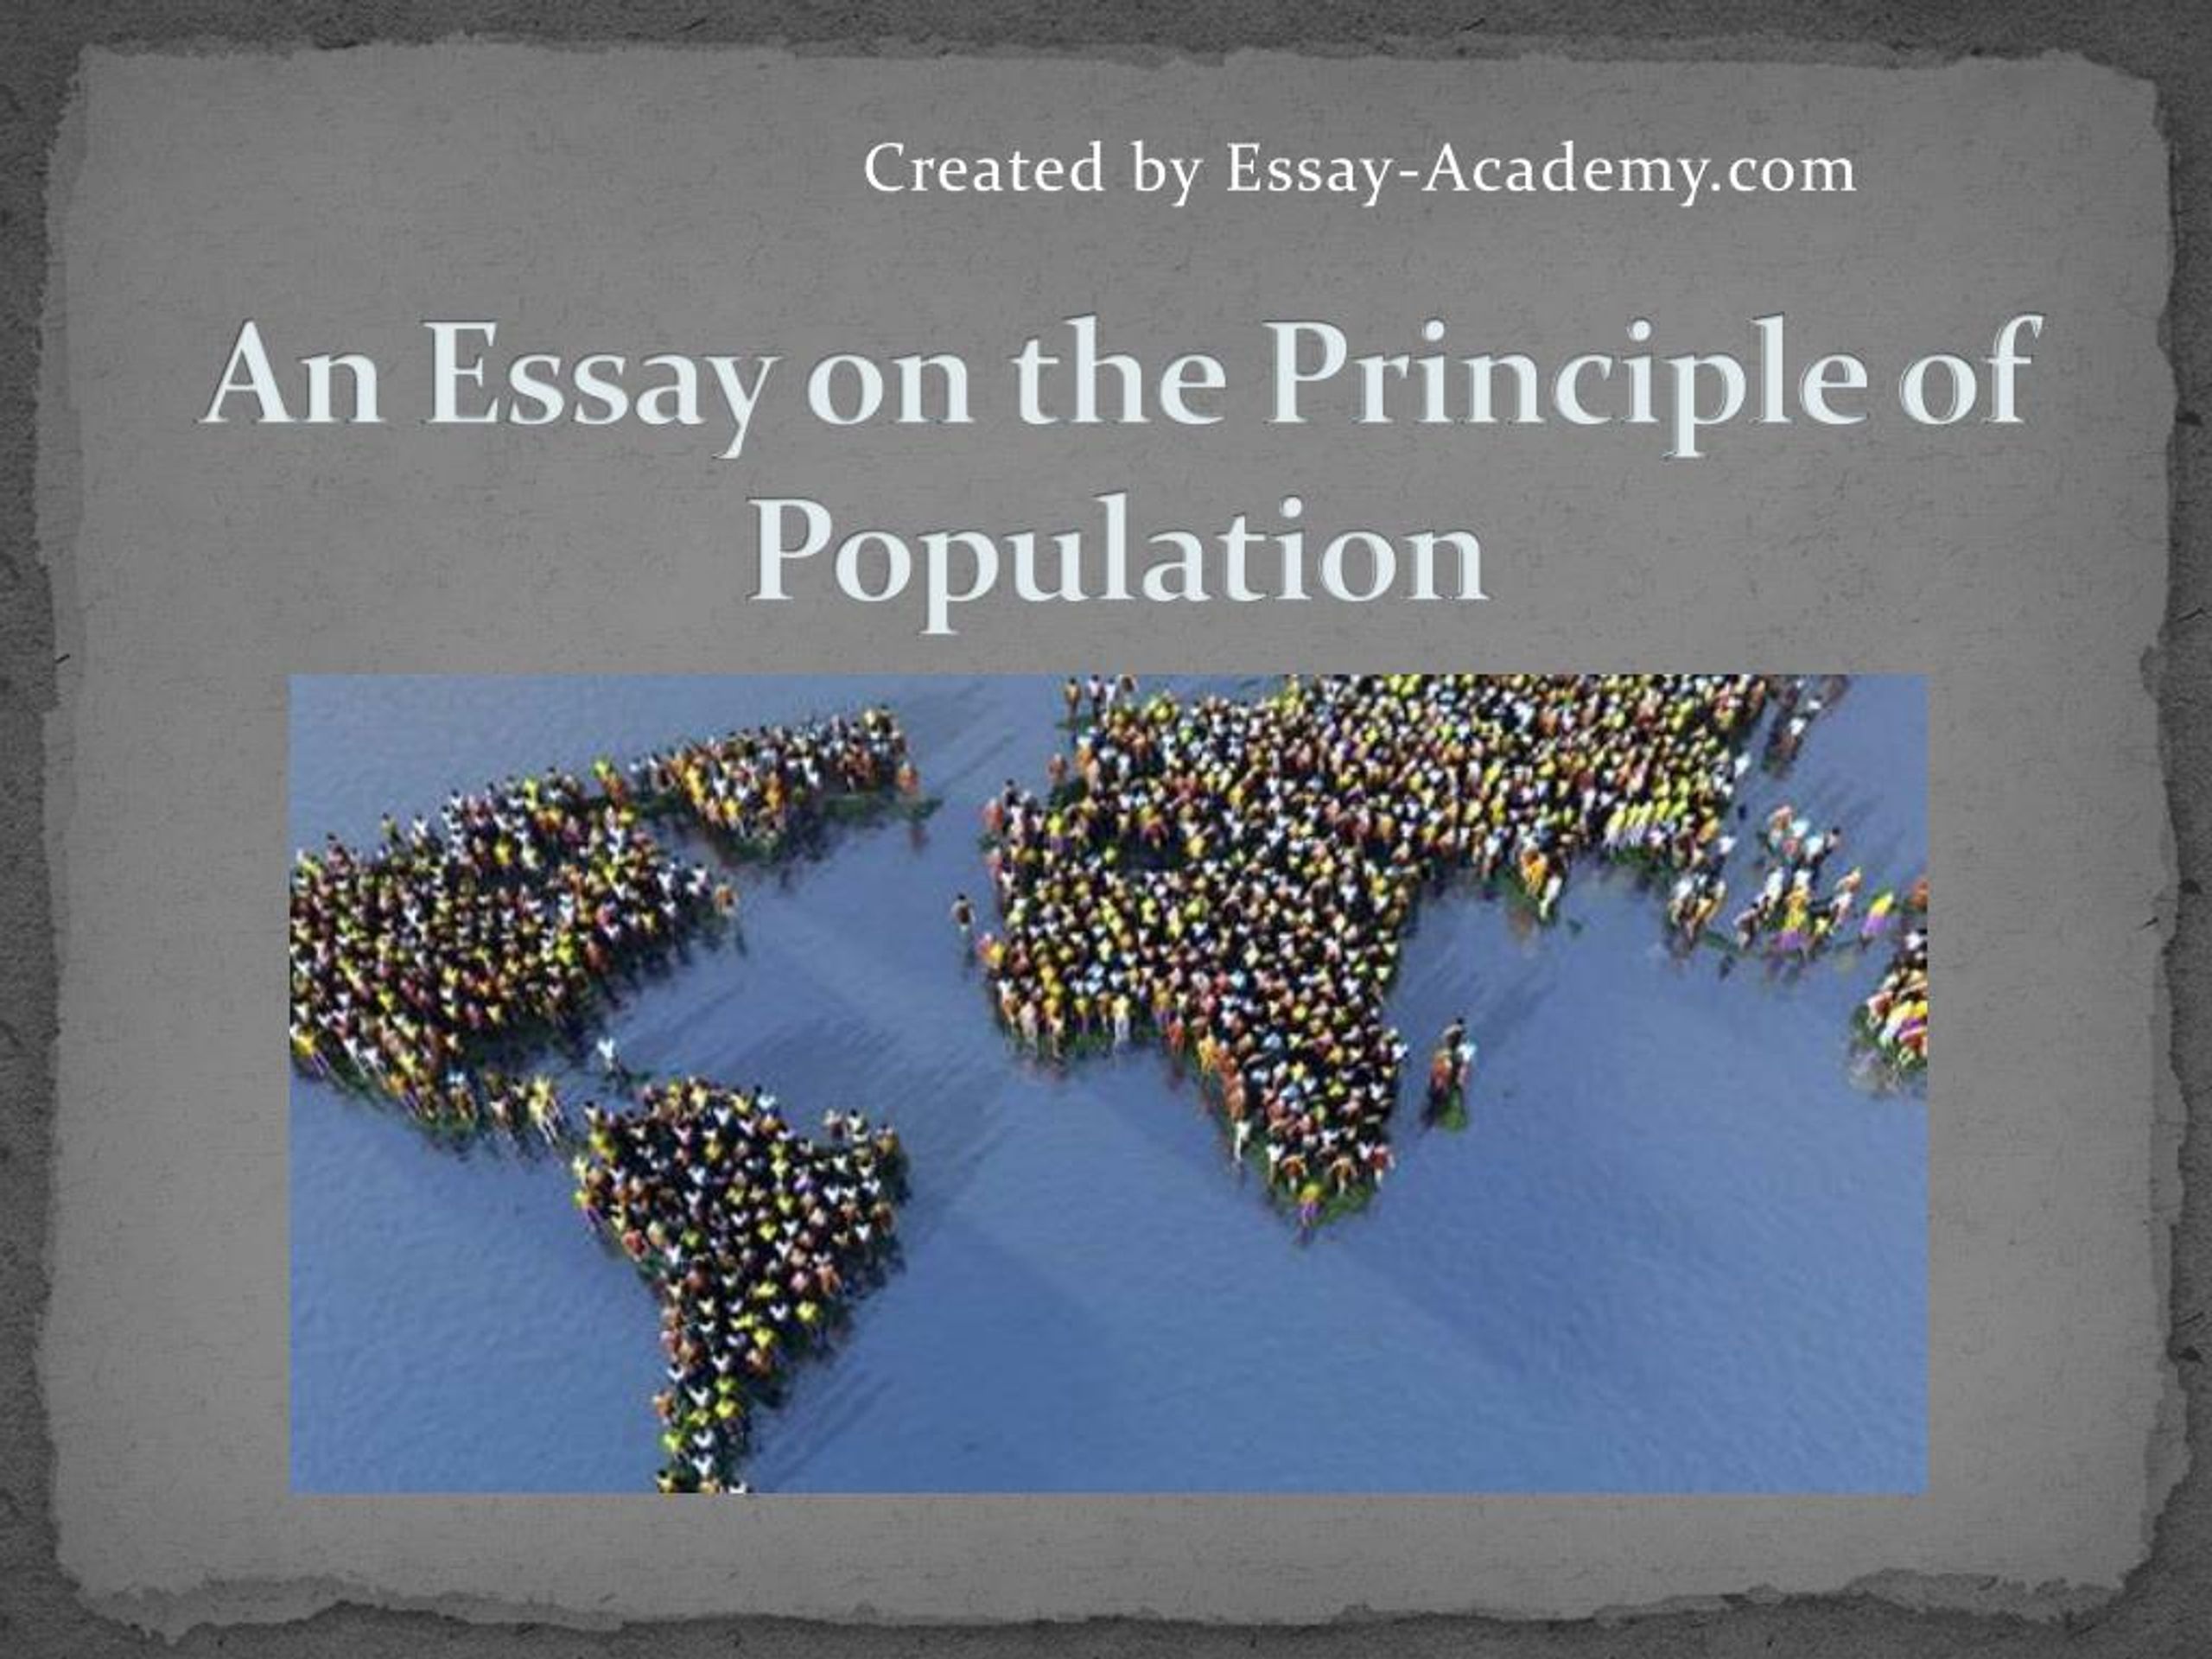 the essay on the principle of population was written by mcq